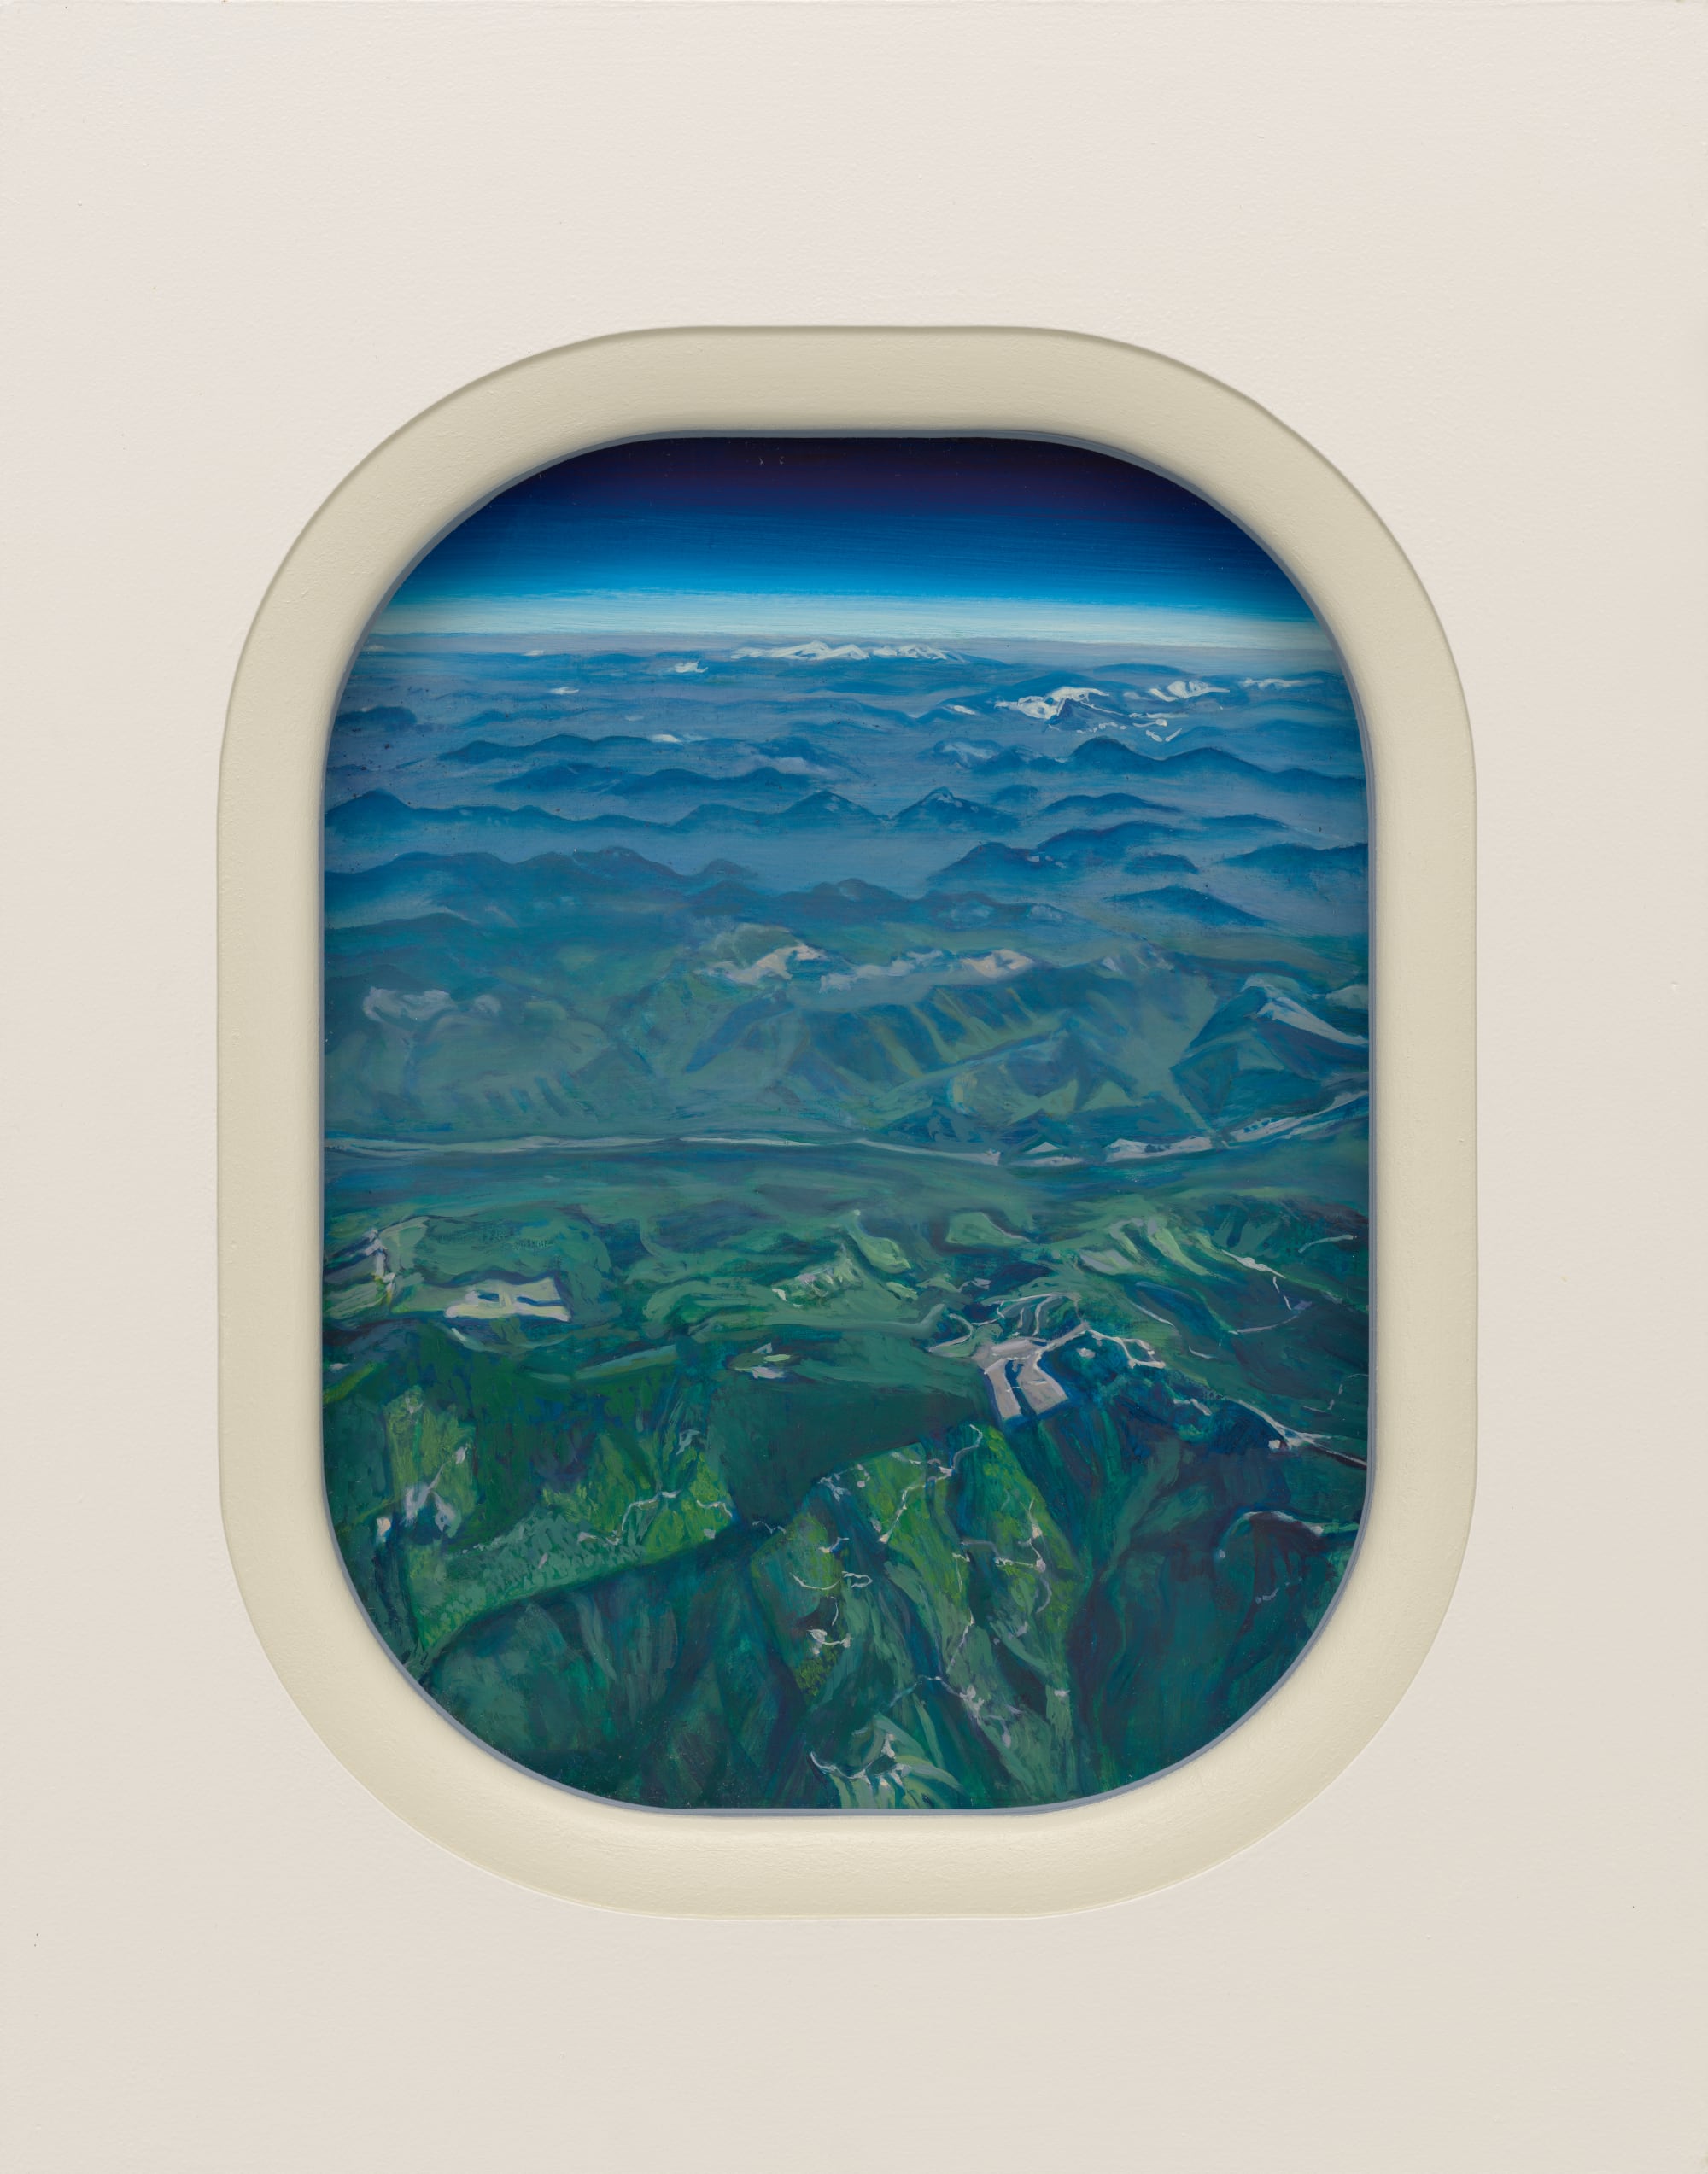 a mountain landscape painting through an airplane-like window